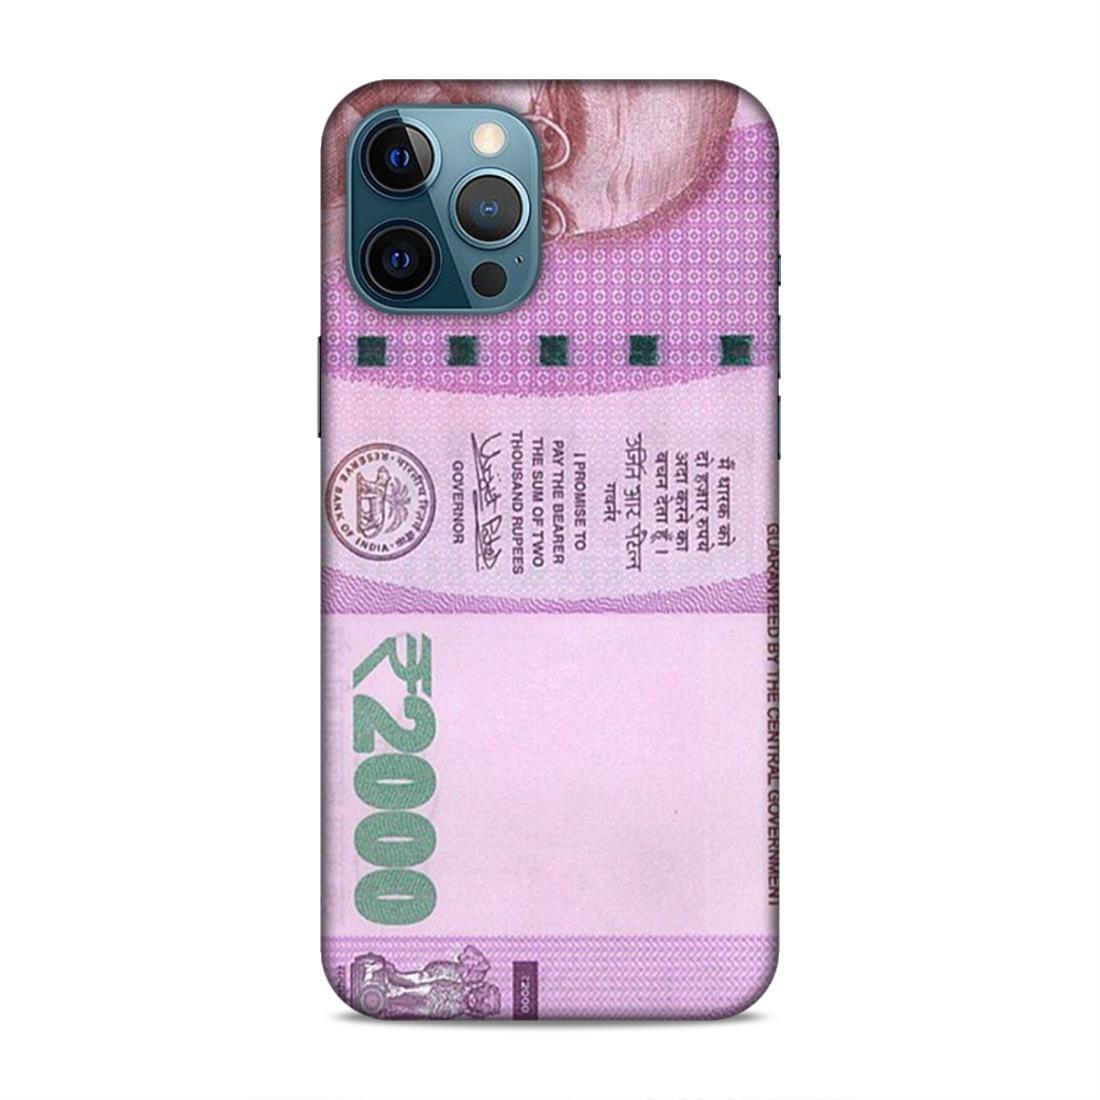 Rs 2000 Currency Note iPhone 12 Pro Max Phone Cover